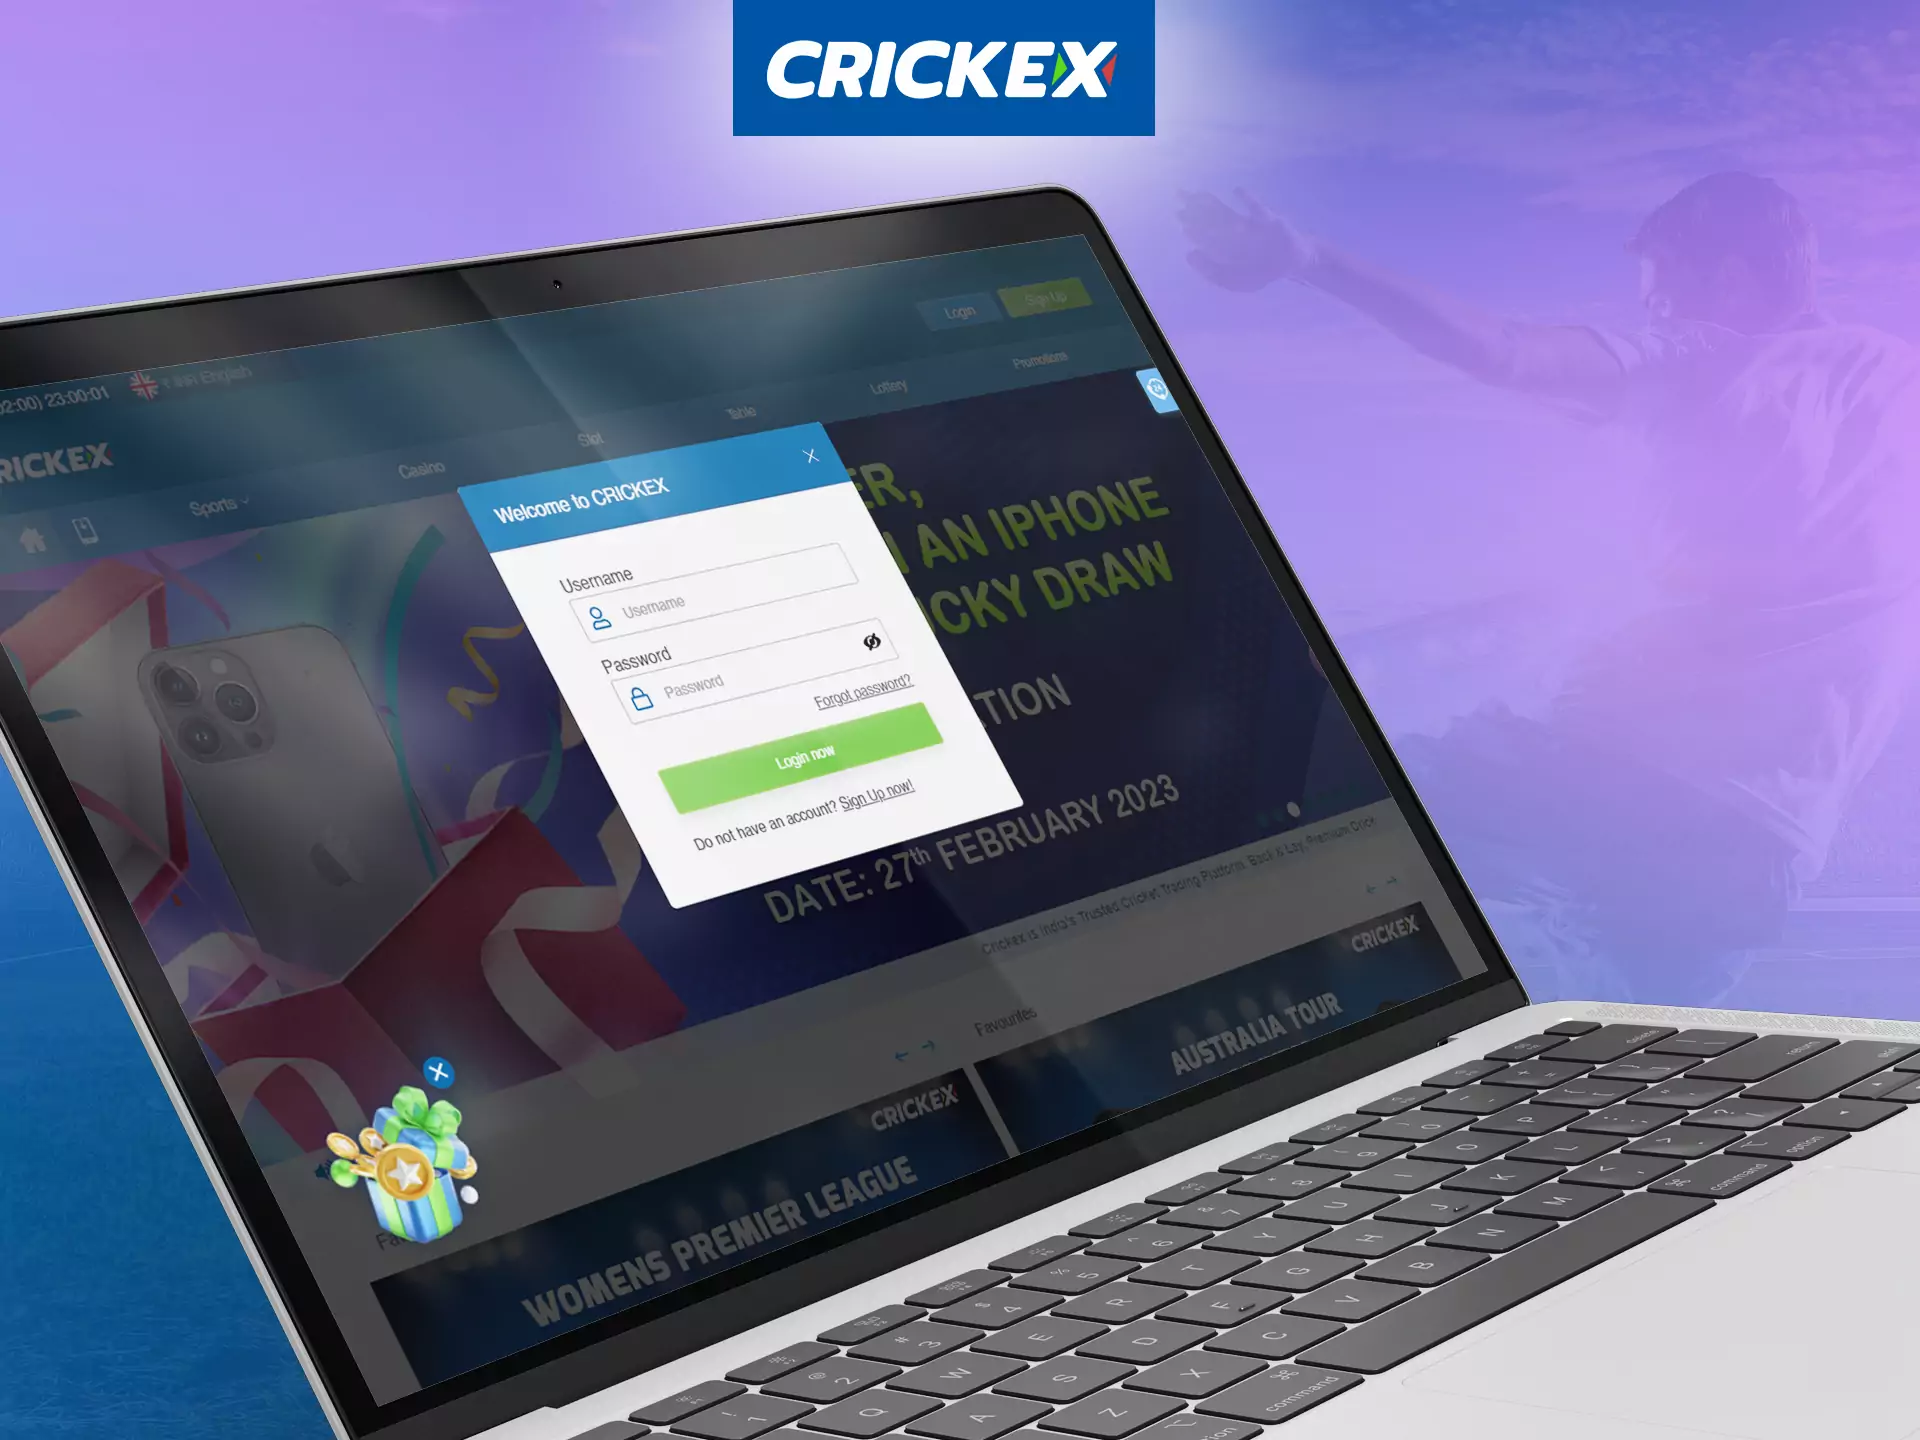 At Crickex, log in to your account to get all the features and bonuses.